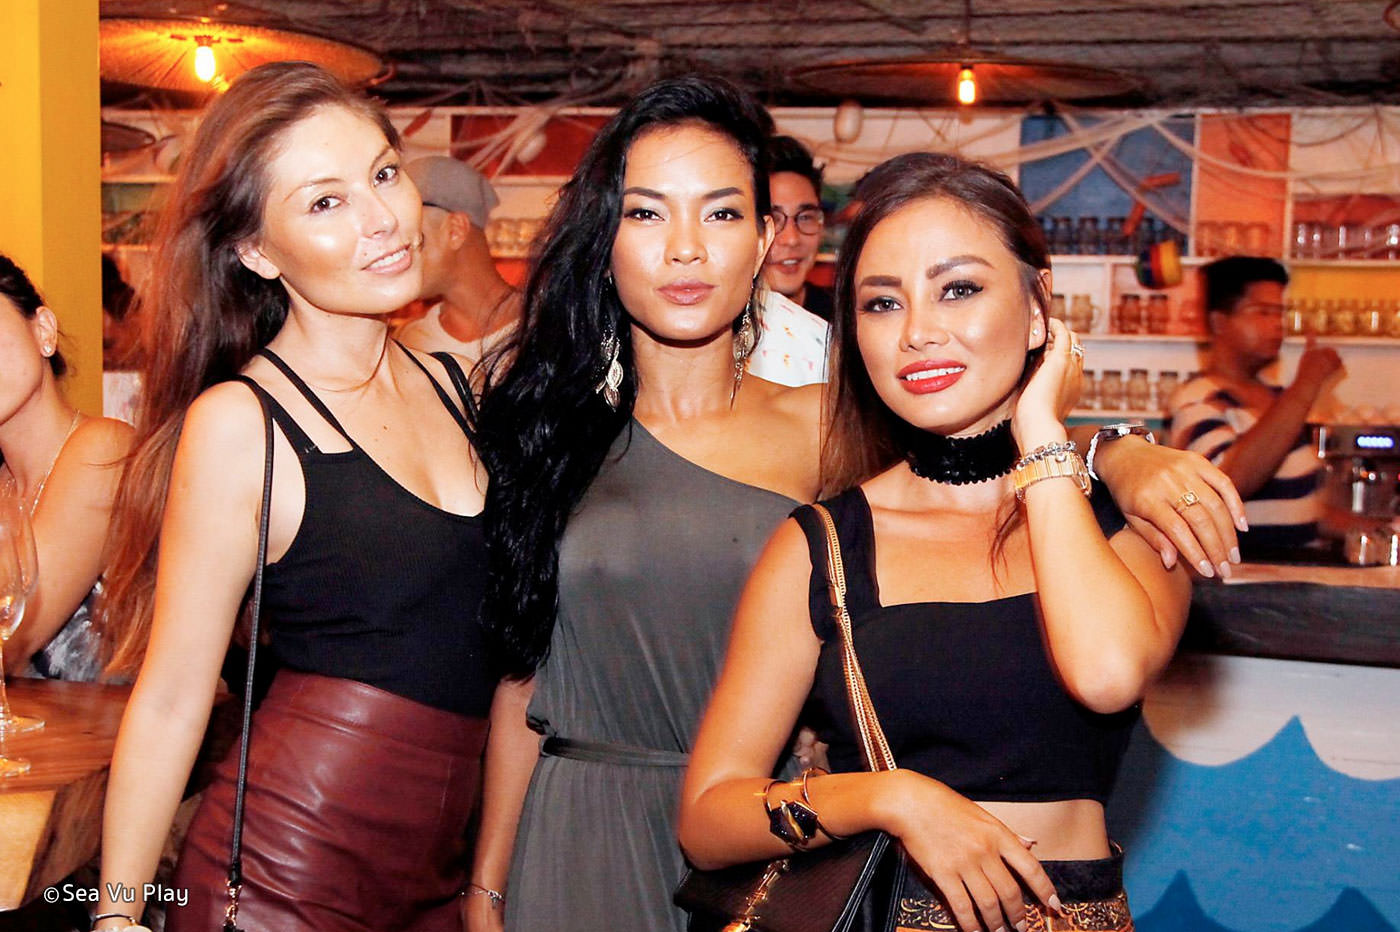 Bali: Nightlife and Clubs | Nightlife City Guide